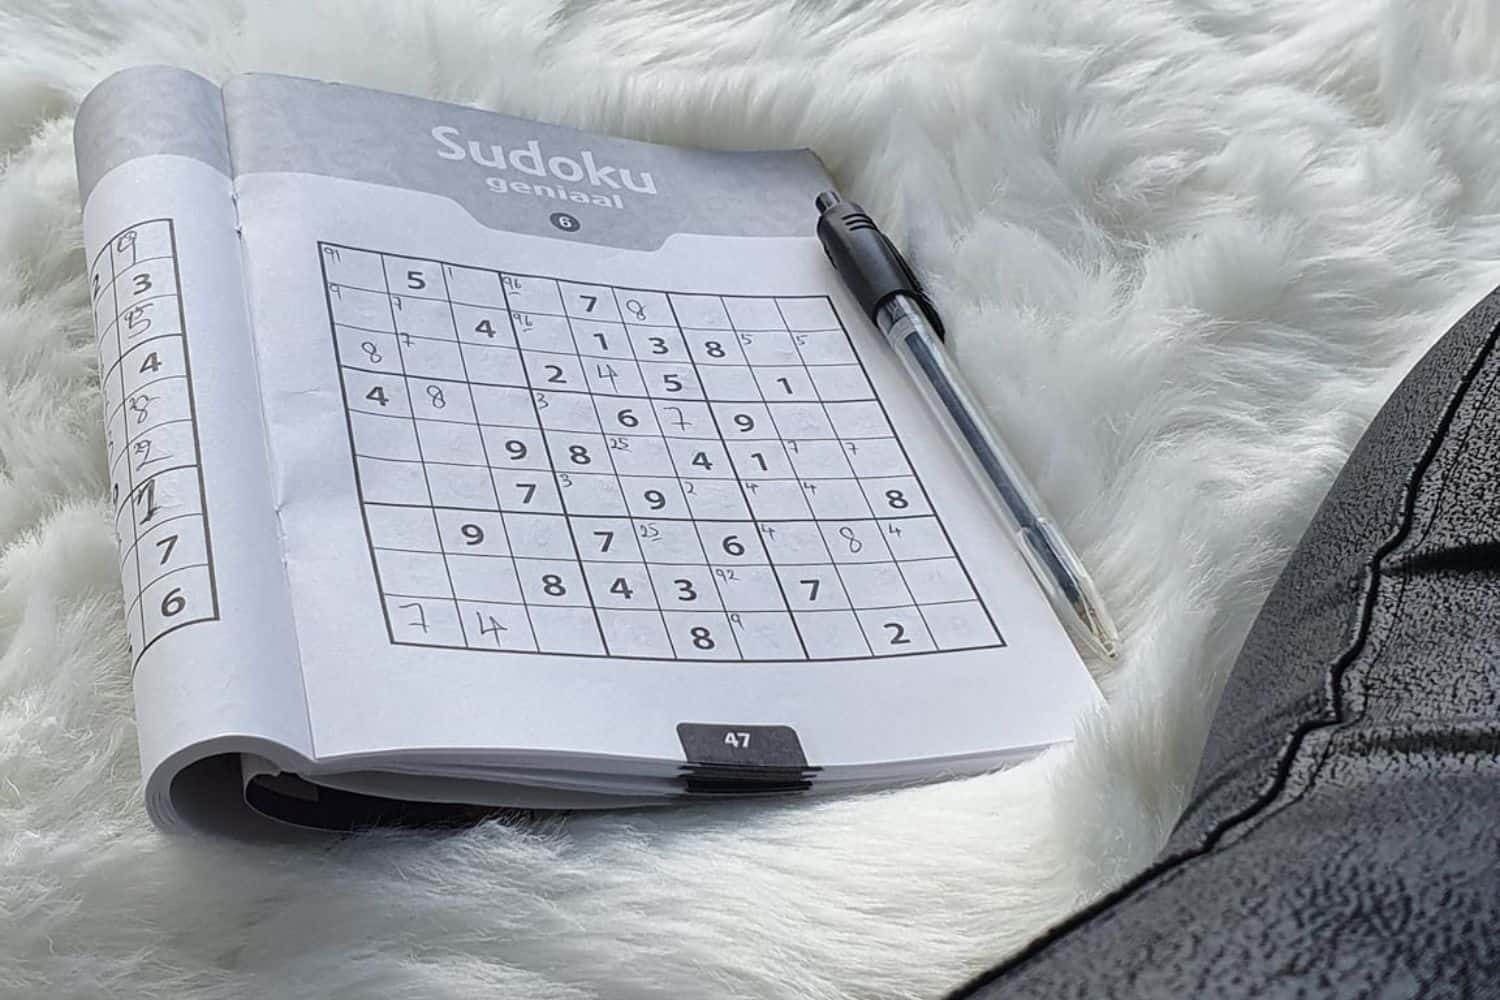 Master Sudoku with Three Essential Rules